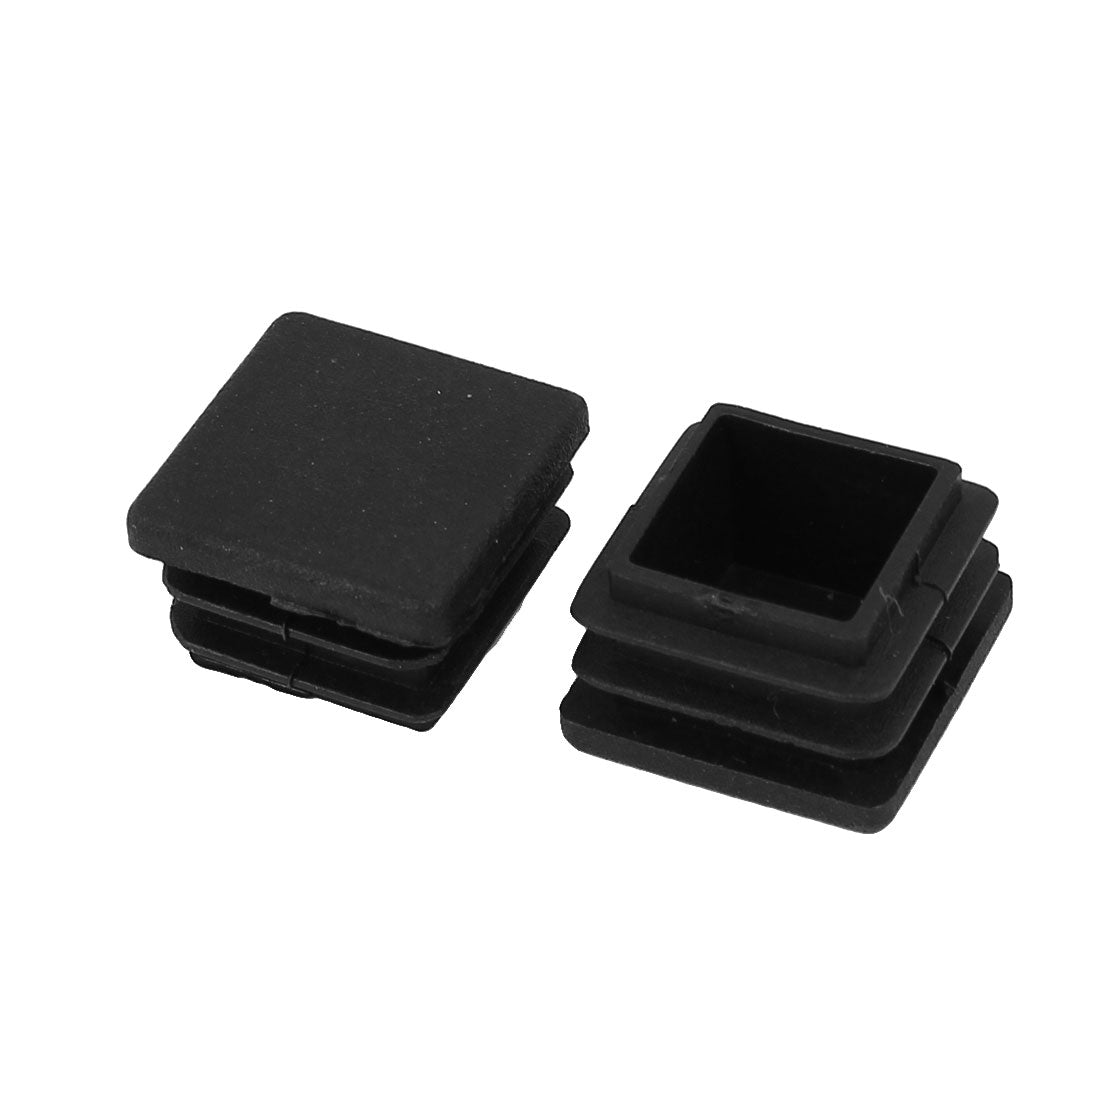 uxcell Uxcell 20mm x 20mm Plastic Square Shaped Blanking End Cap Tube Insert Black 200pcs